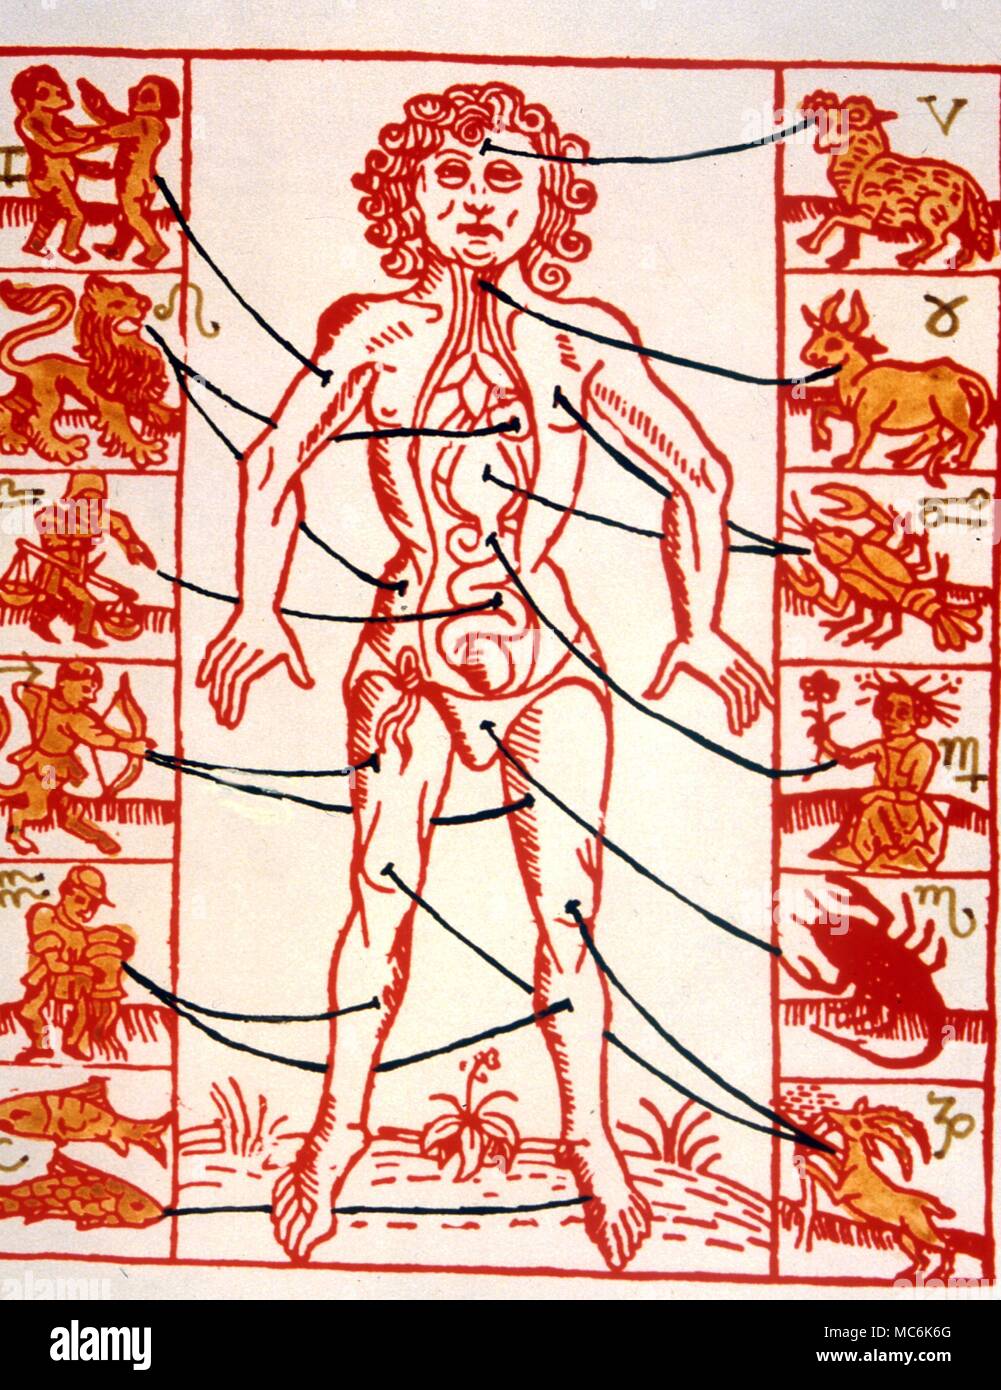 Zodiac Man .16th century woodcut of the melothesic figure with images and sigils linked to the appropriate bodily parts Stock Photo